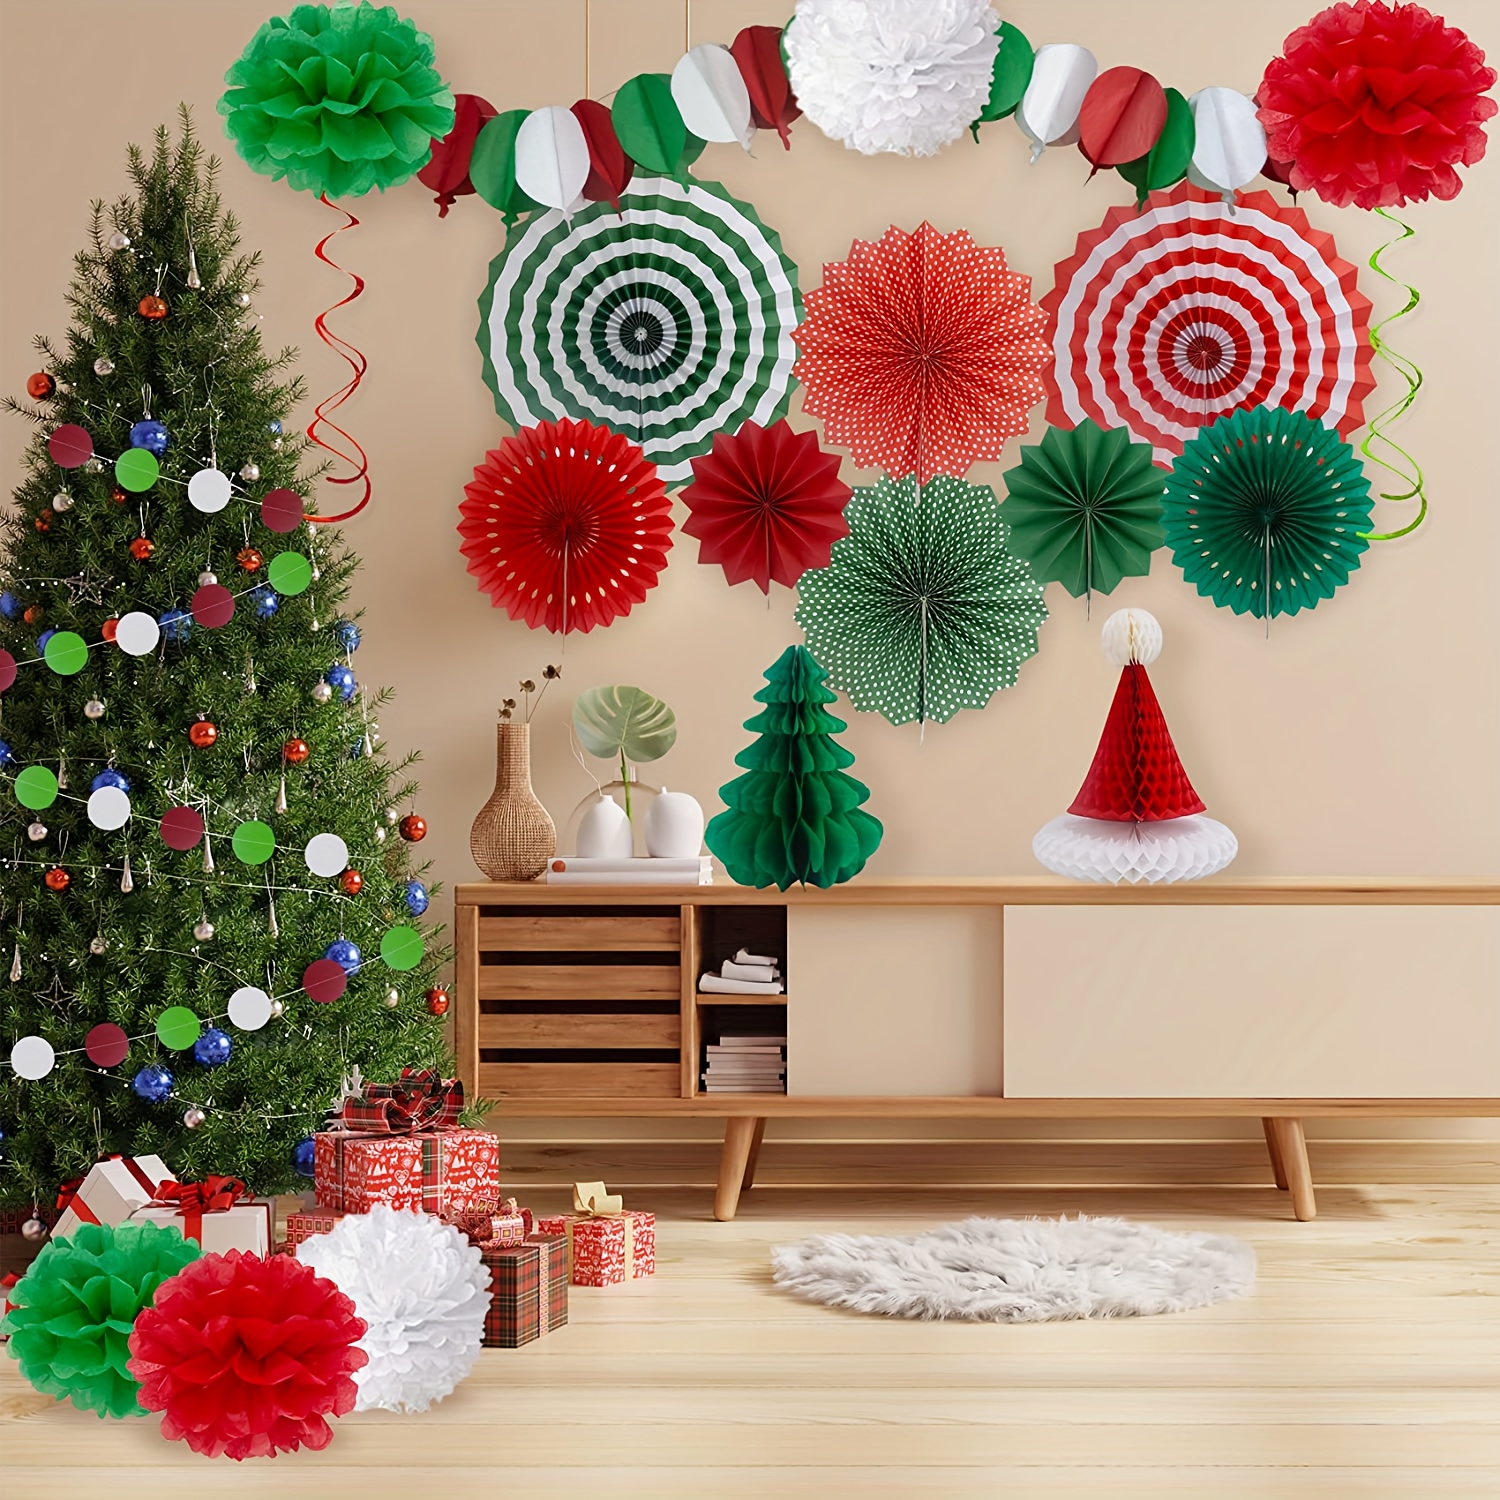 Red Hanging Paper Fan - Hanging Paper Decorations - Pf17-007